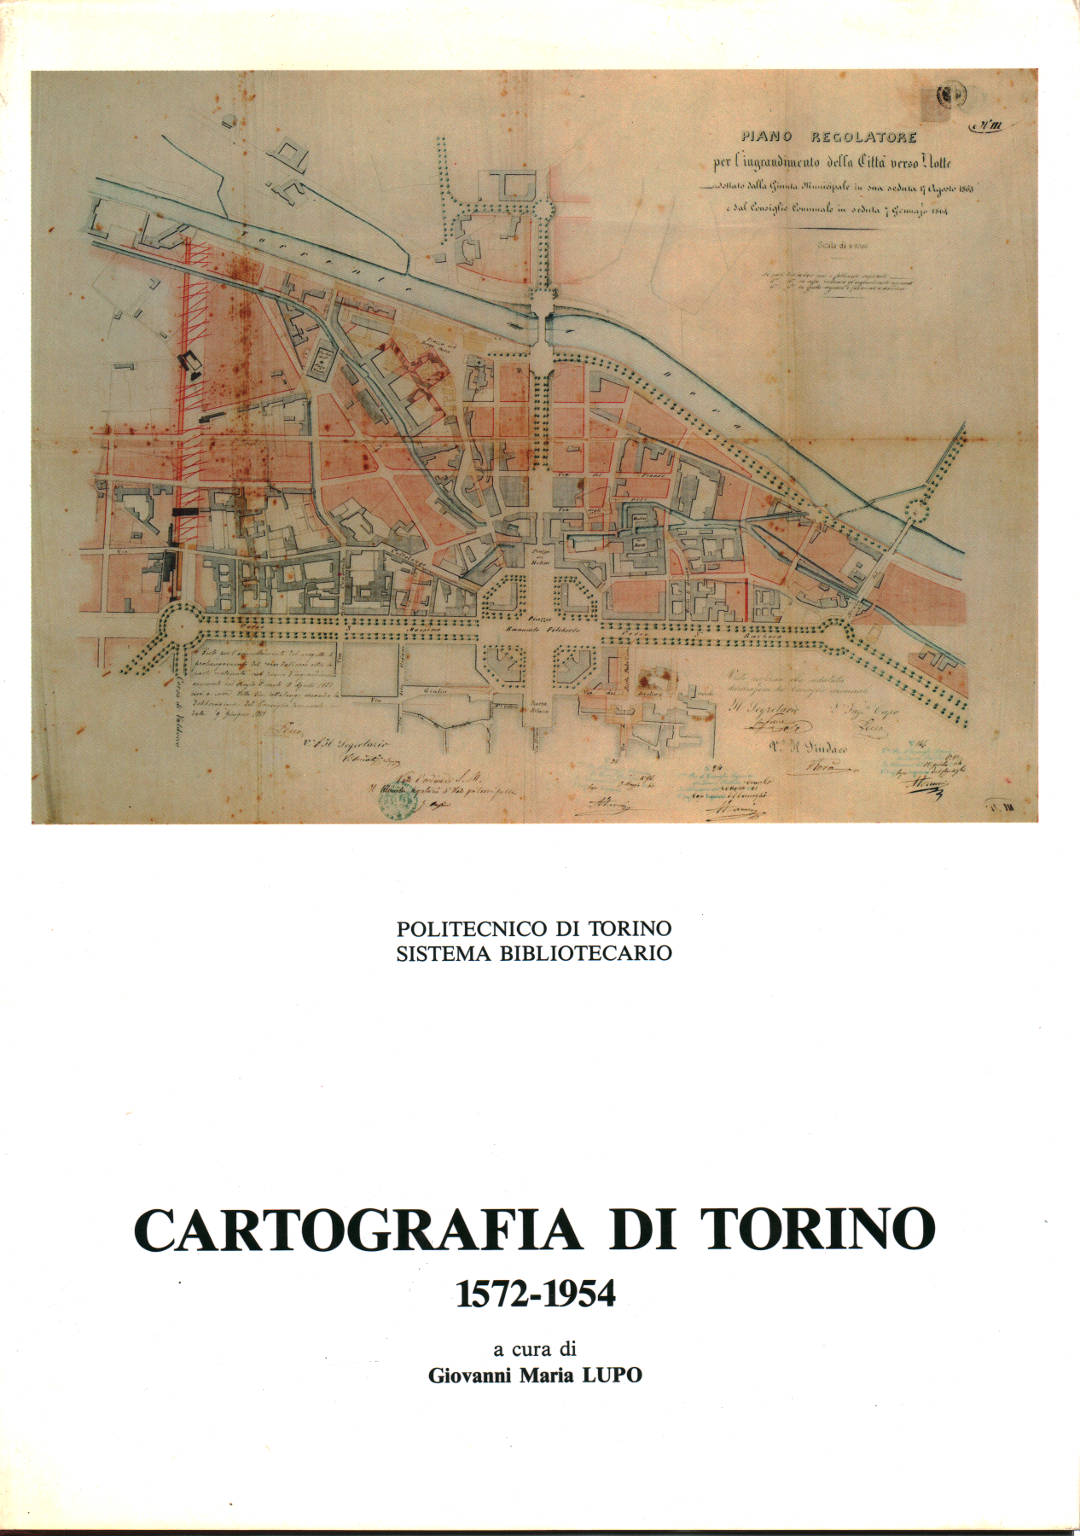 Cartography of Turin